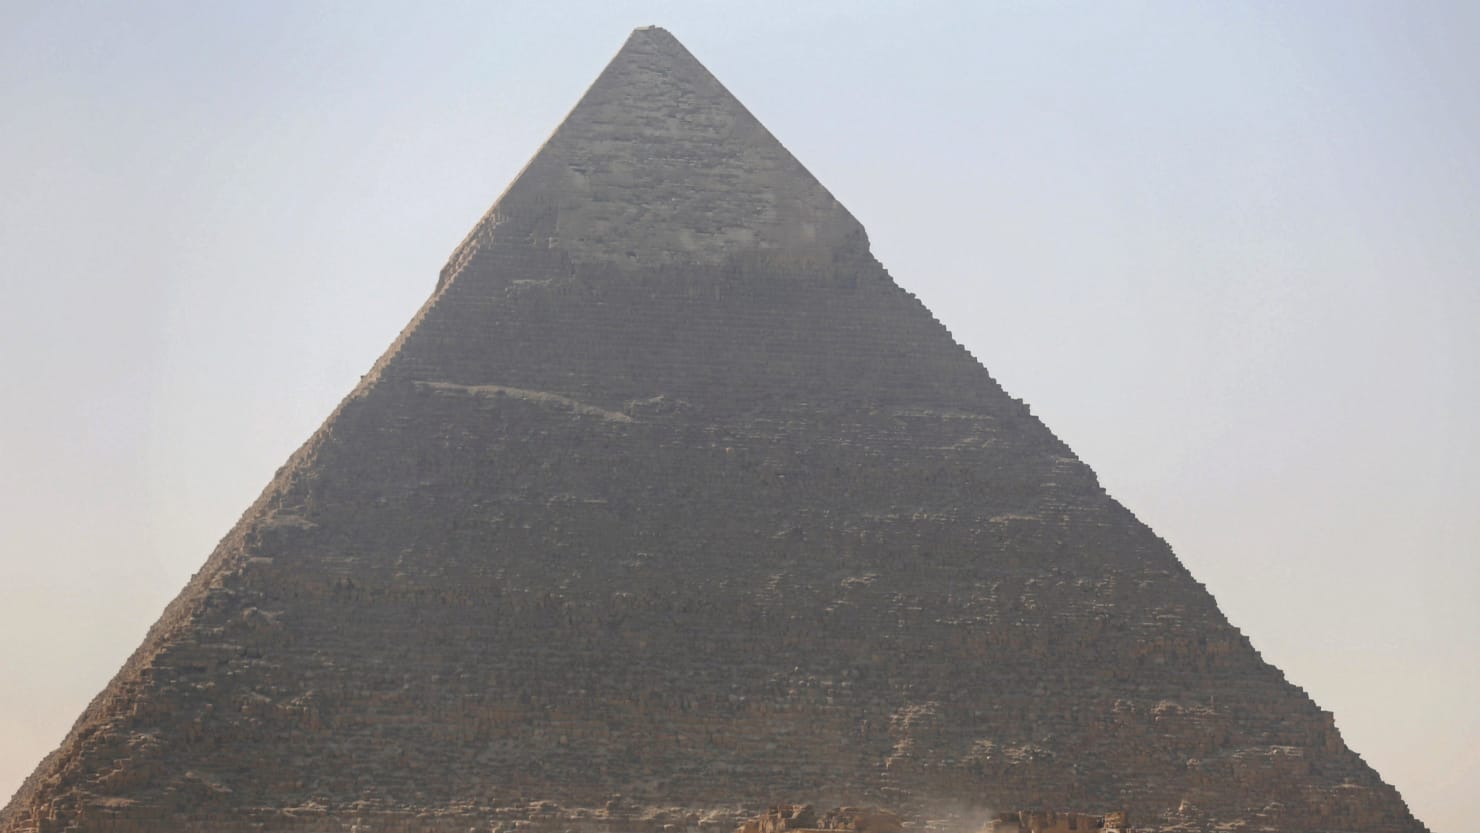 Foreign Couple Poses Nude Atop Great Khufu Pyramid Of Giza In Egypt 5989